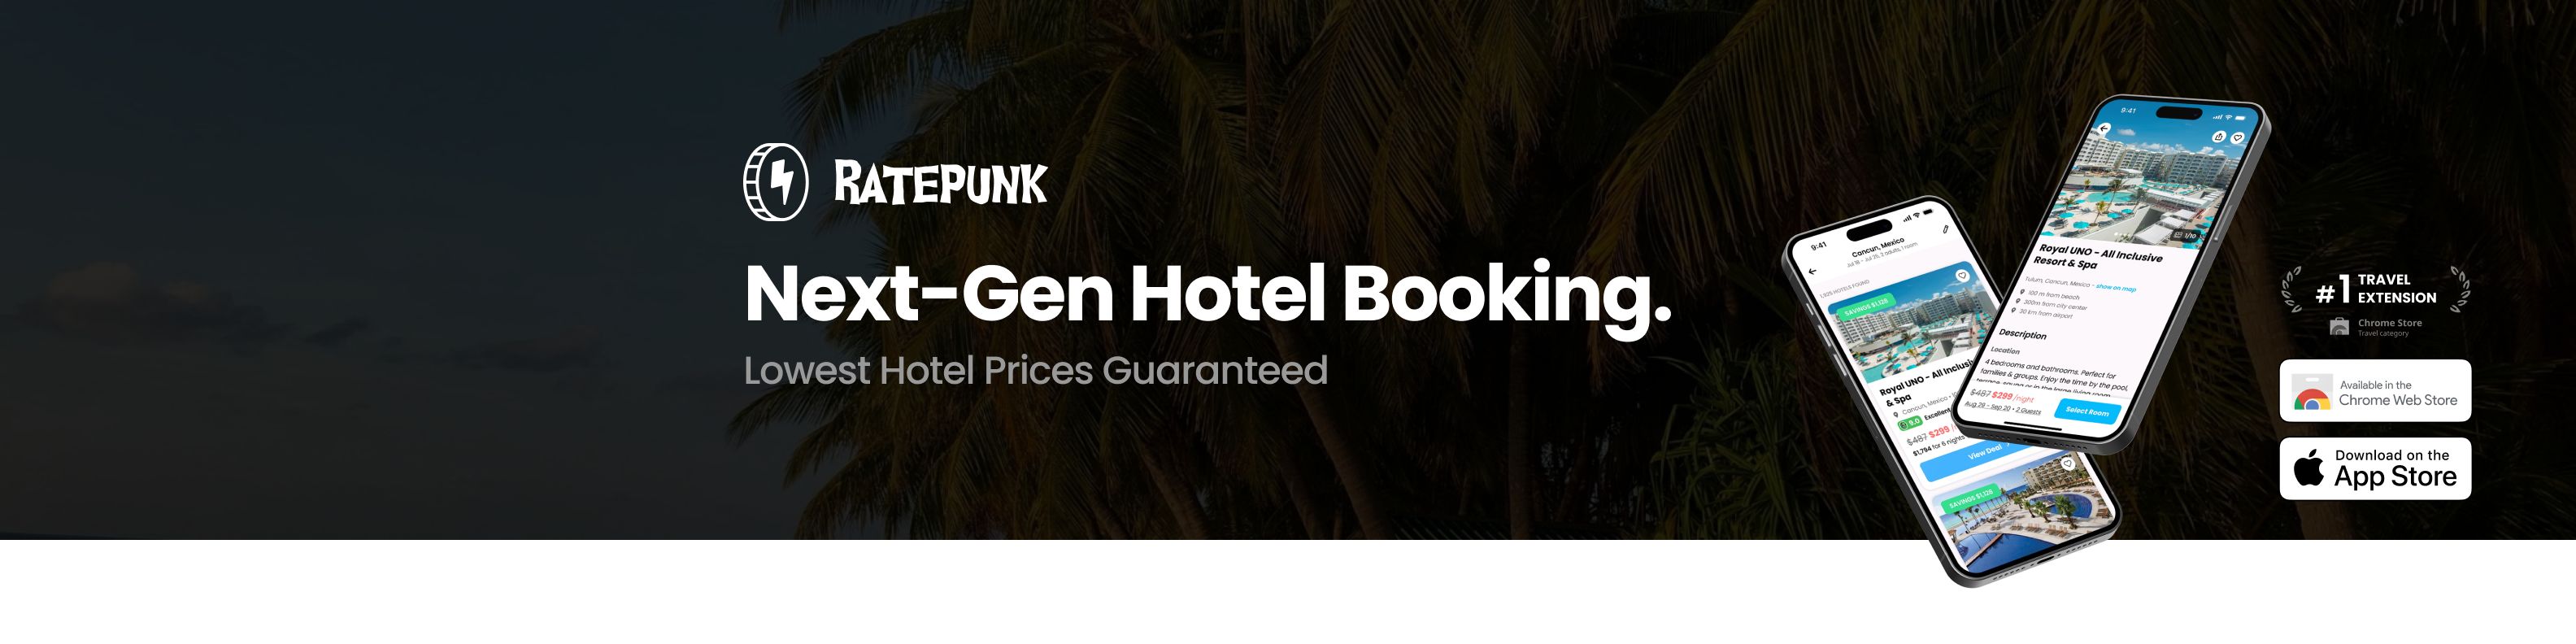 ratepunk next gen hotel booking lowest hotel prices guaranteed